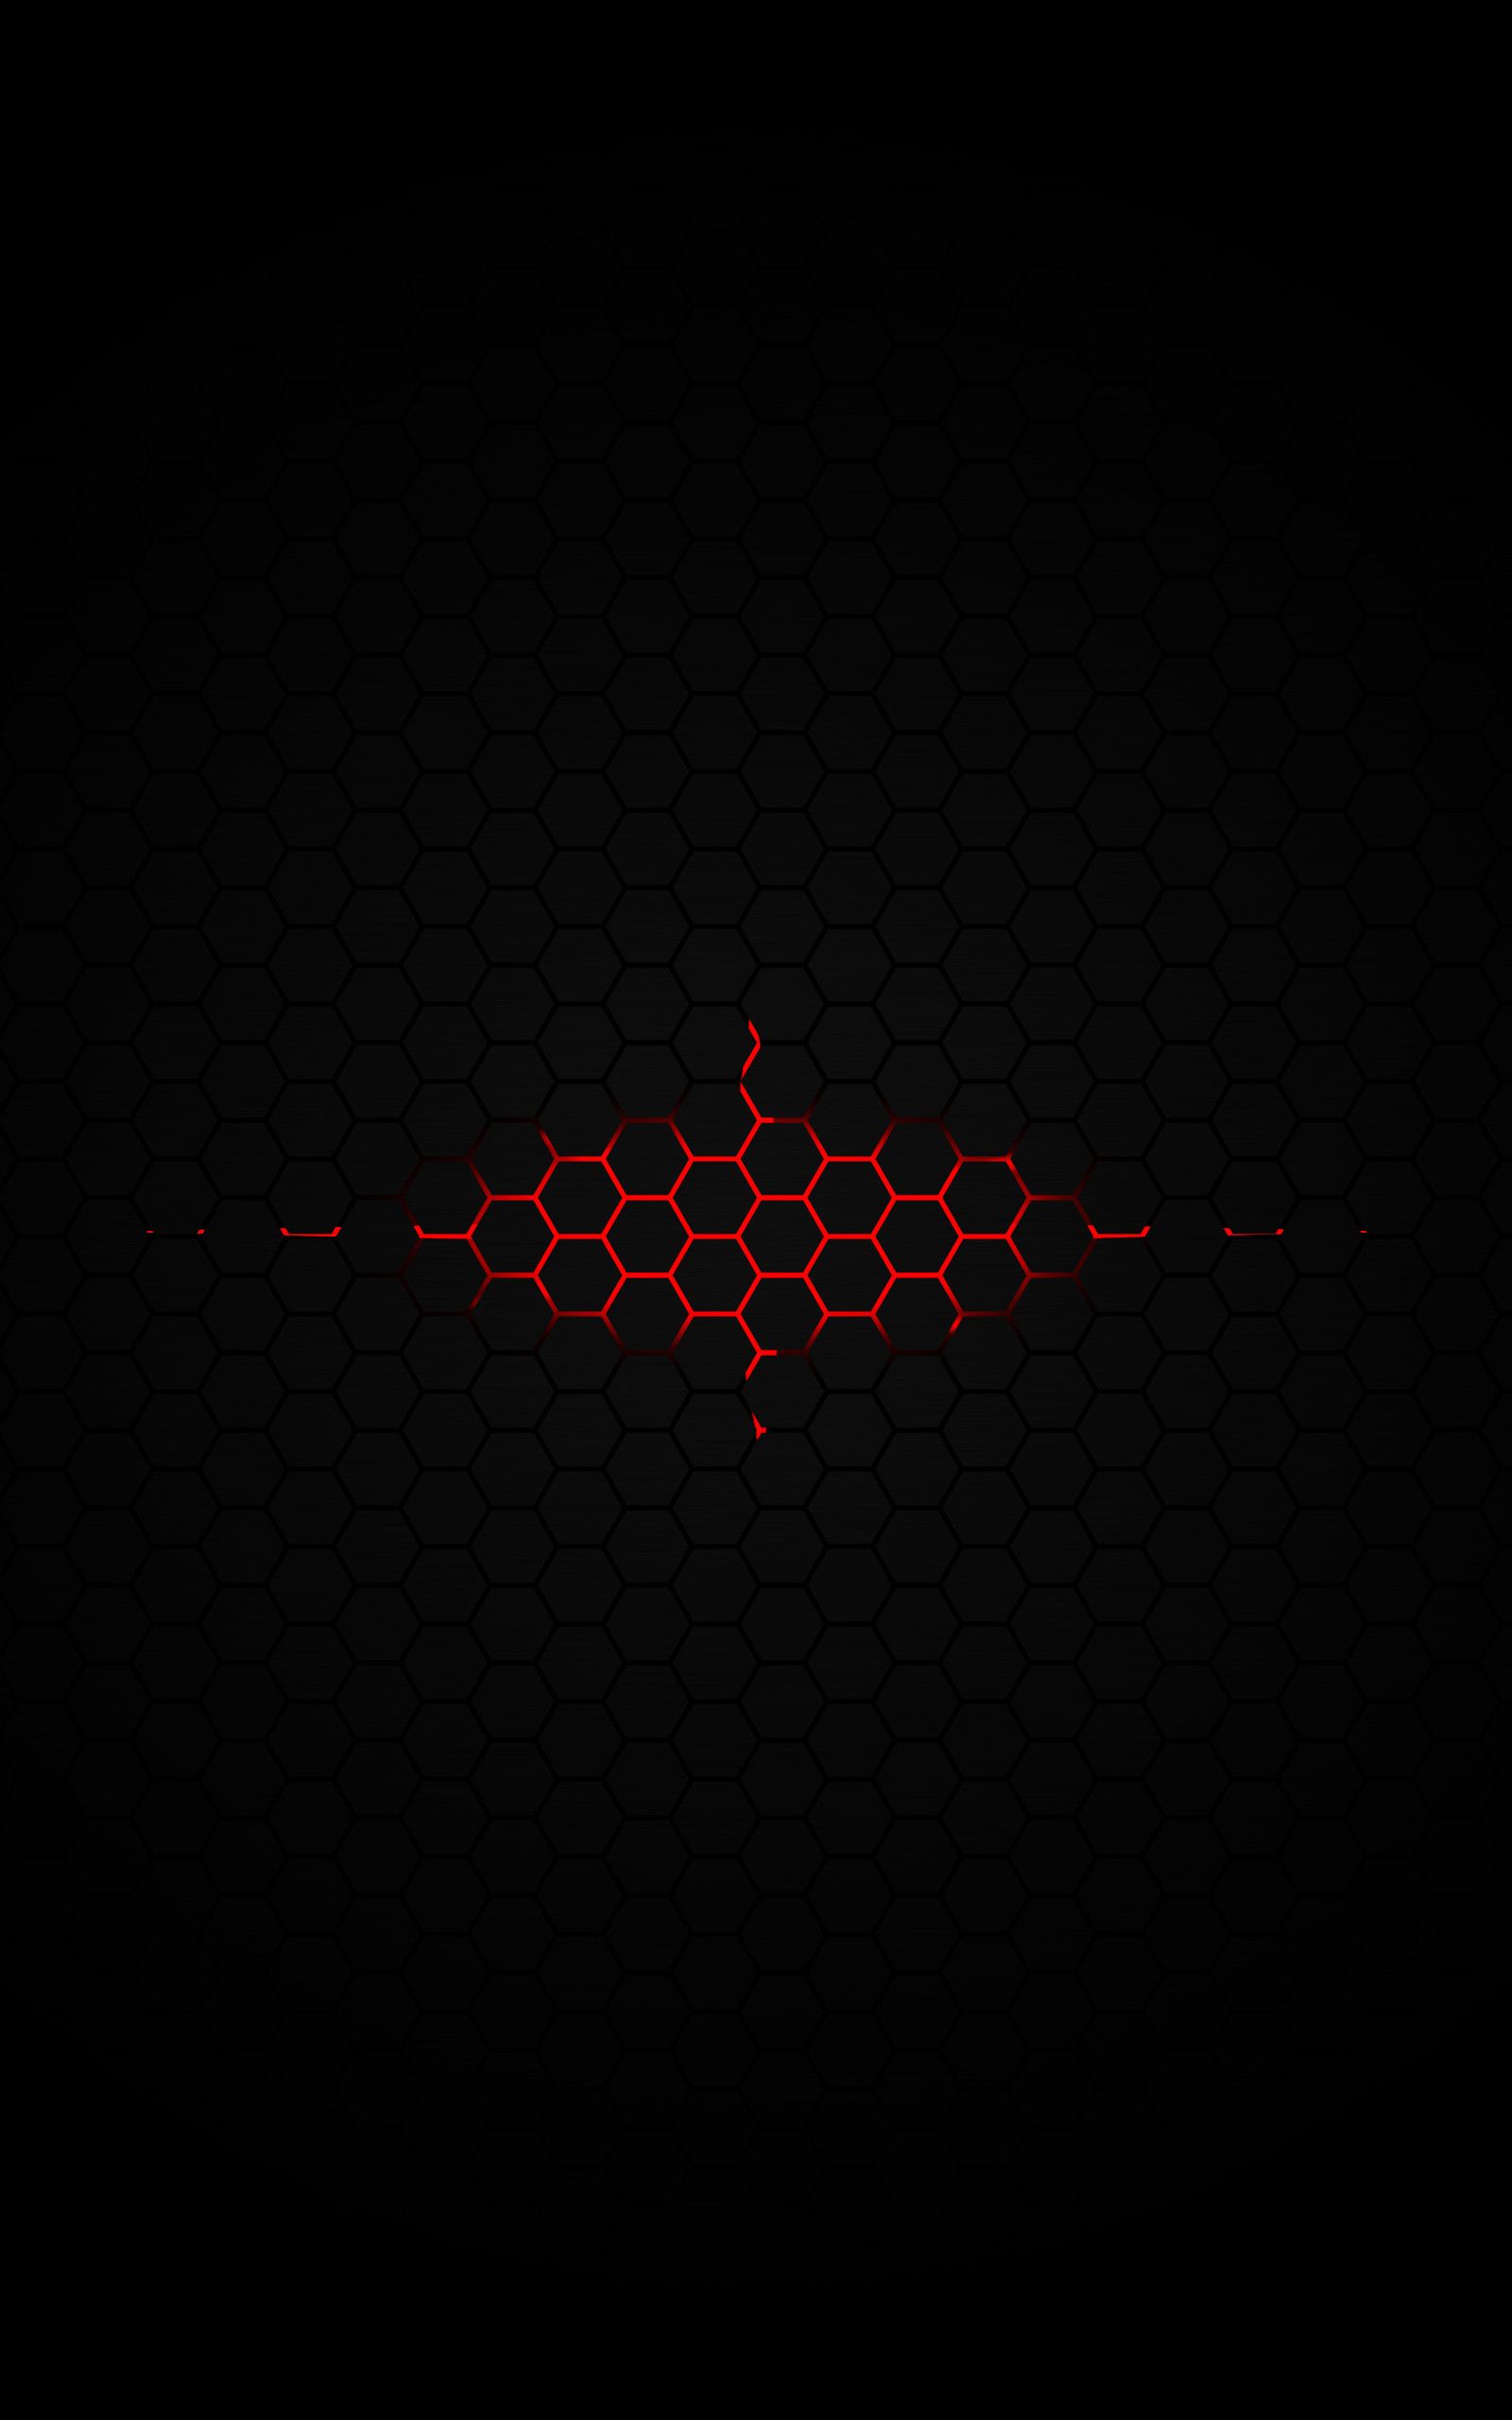 Red and Black Hexagon Wallpapers - Top Free Red and Black Hexagon ...